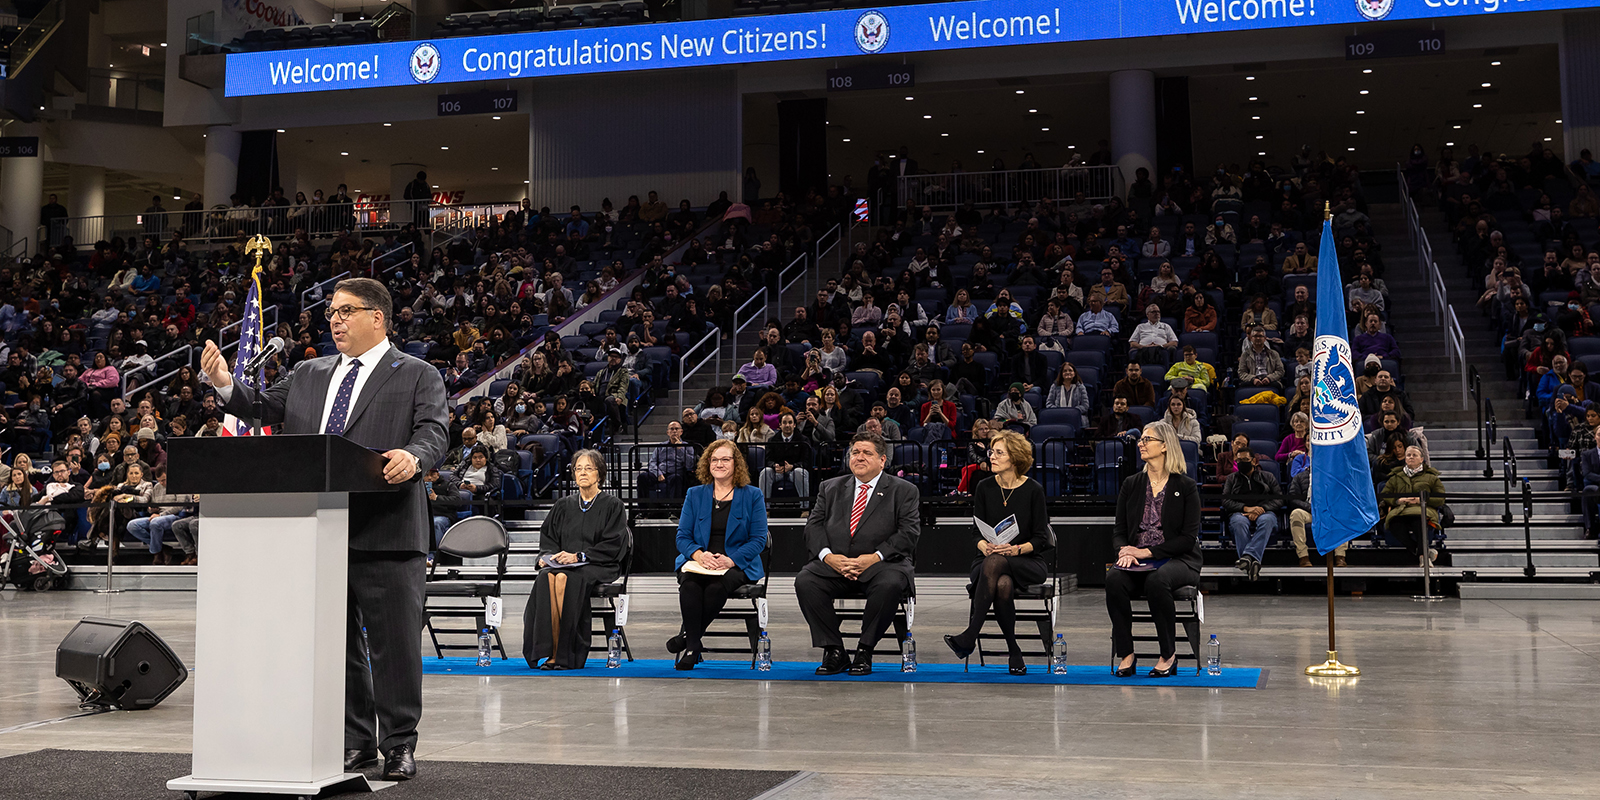 President Rob Manuel stands at a podium in the center of an arena floor, behind him sits dignitaries. 